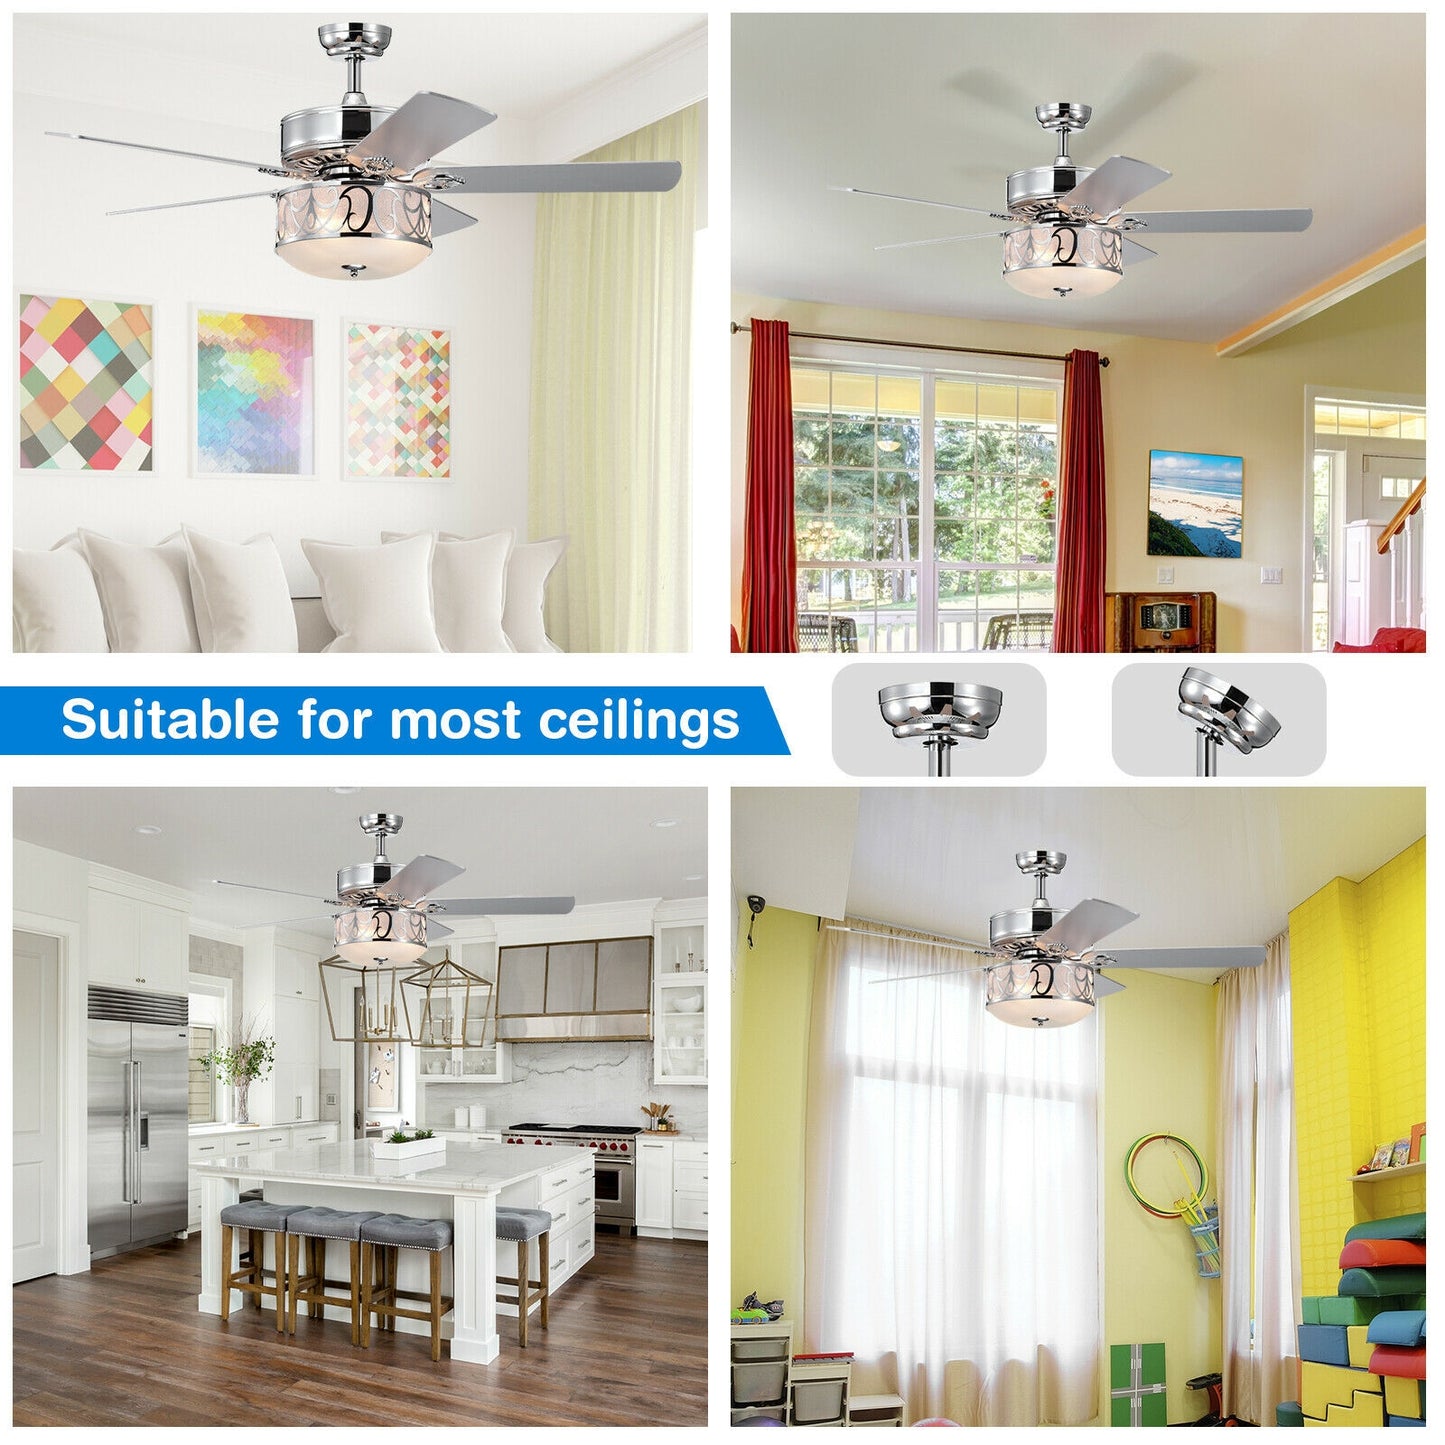 52 Inch Ceiling Fan with Light Reversible Blade and Adjustable Speed-Silver